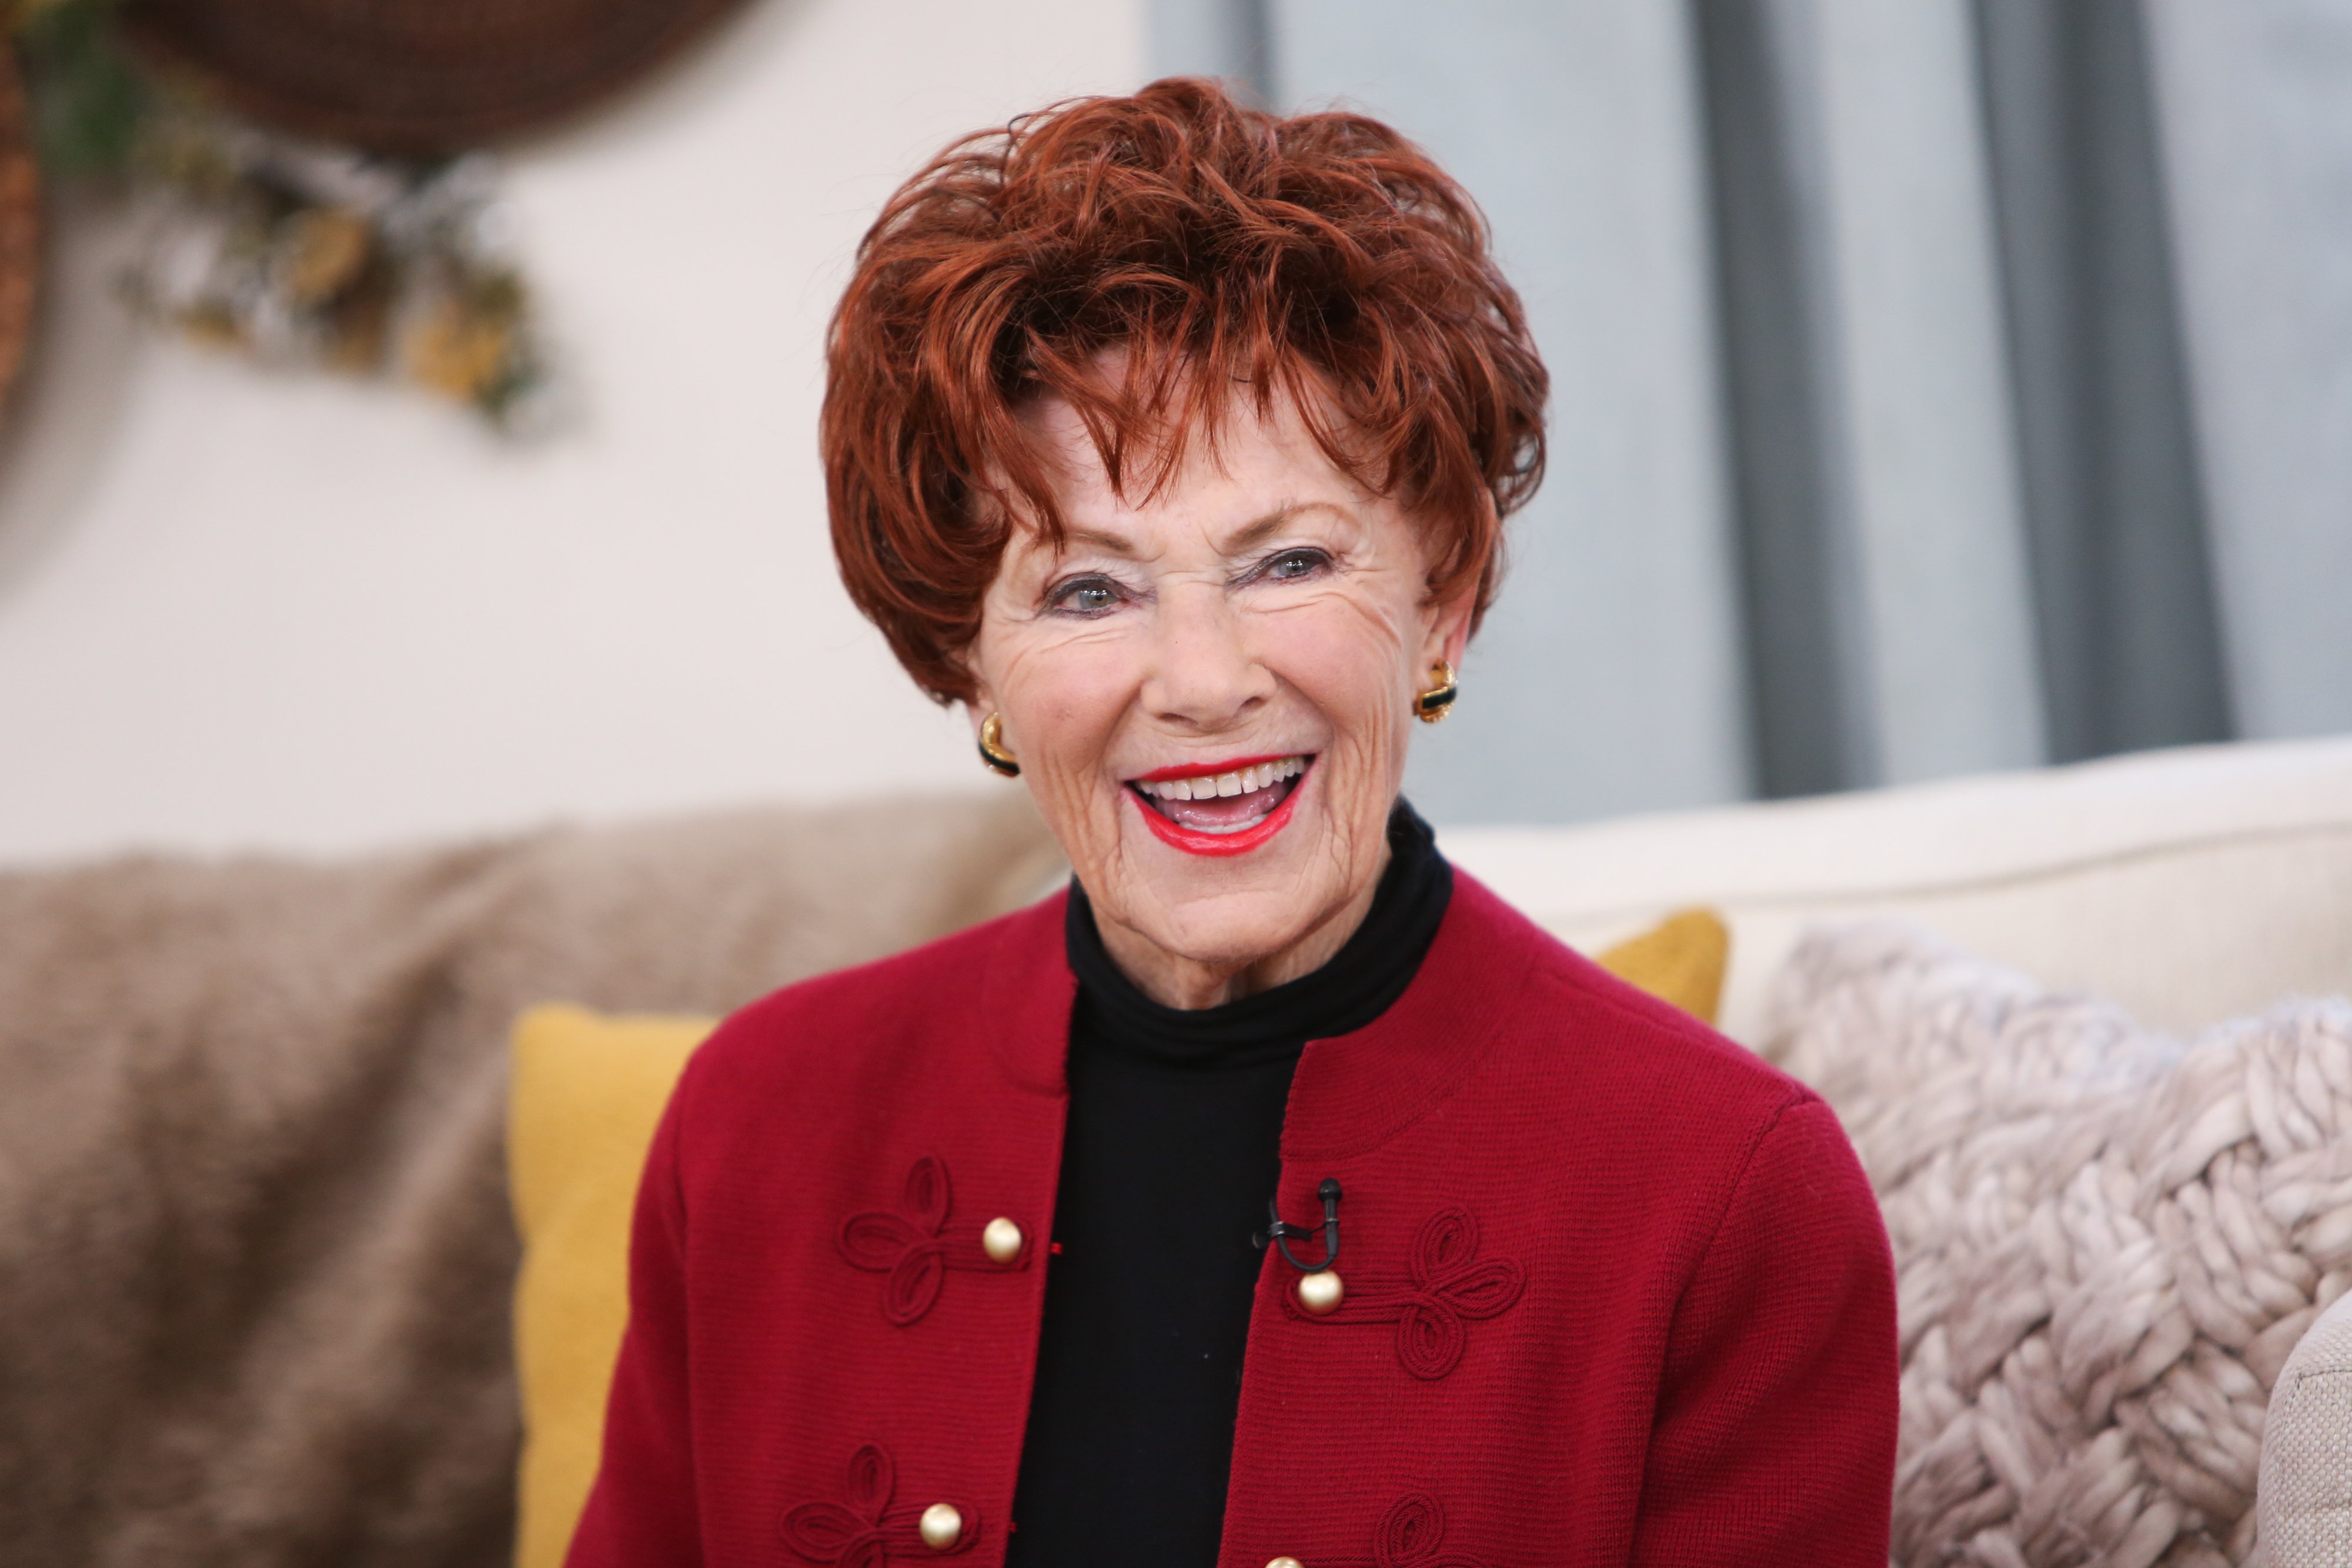 Marion Ross visits Hallmark's "Home & Family" at Universal Studios Hollywood on January 23, 2019 in Universal City, California | Source: Getty Images